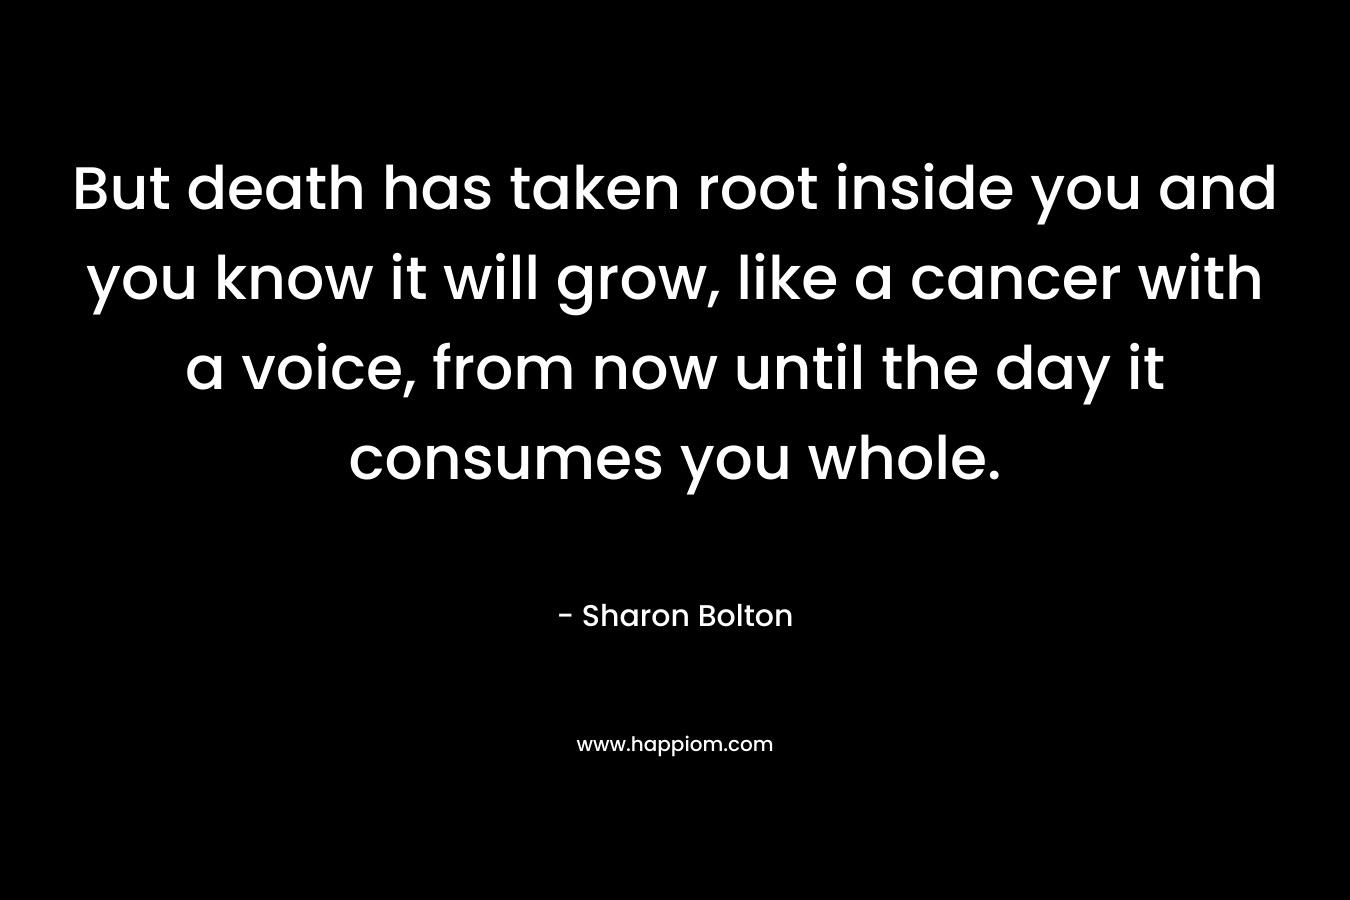 But death has taken root inside you and you know it will grow, like a cancer with a voice, from now until the day it consumes you whole.